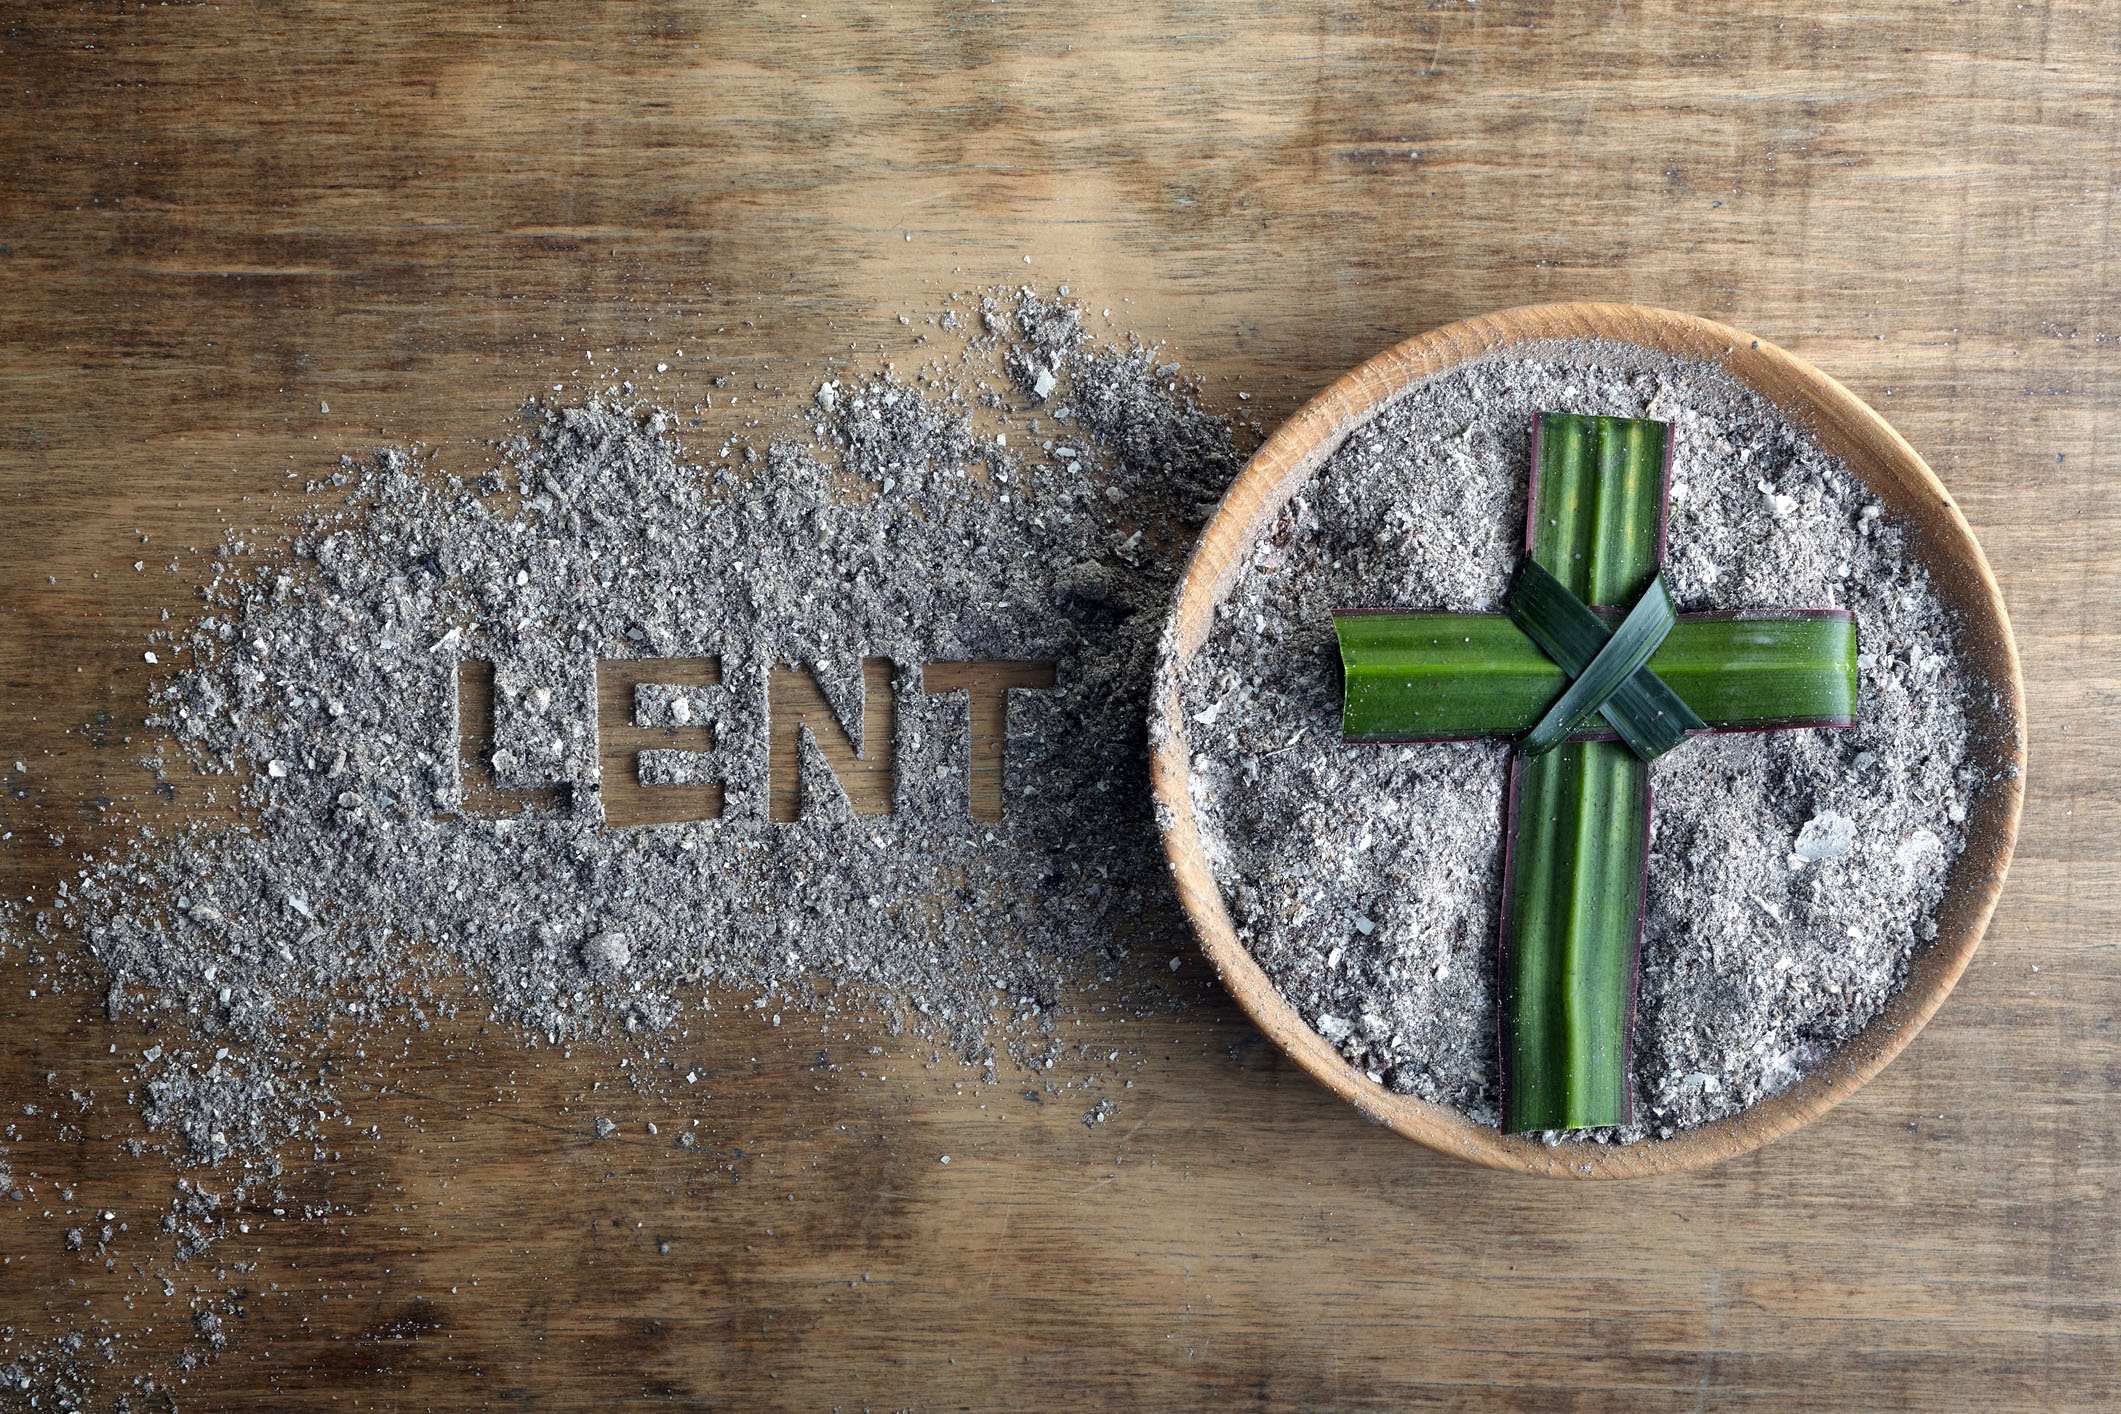 Ecumenical Lenten Series provides chance to come together on Wednesday nights in Wilmington